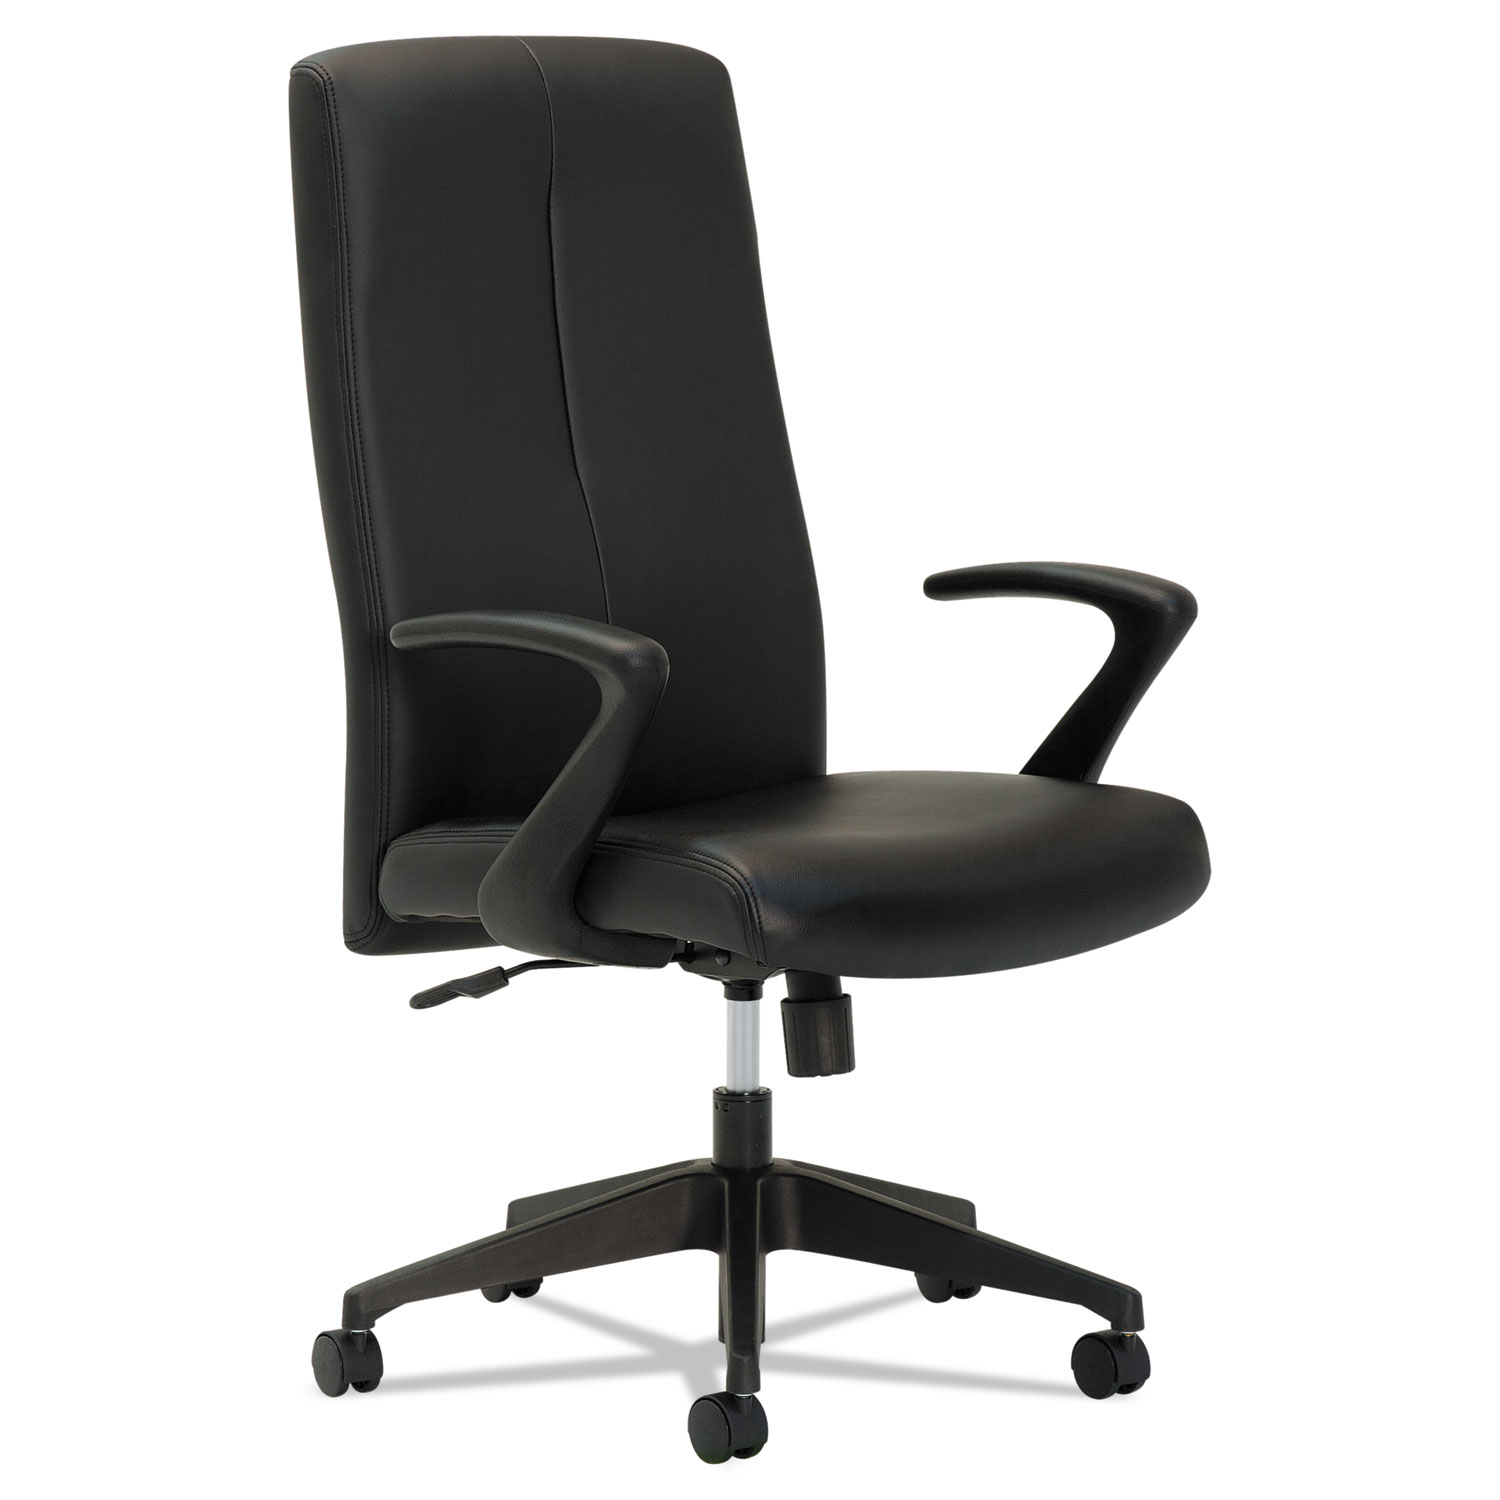 Executive High-Back Chair, Fixed Open Loop Arms, Black